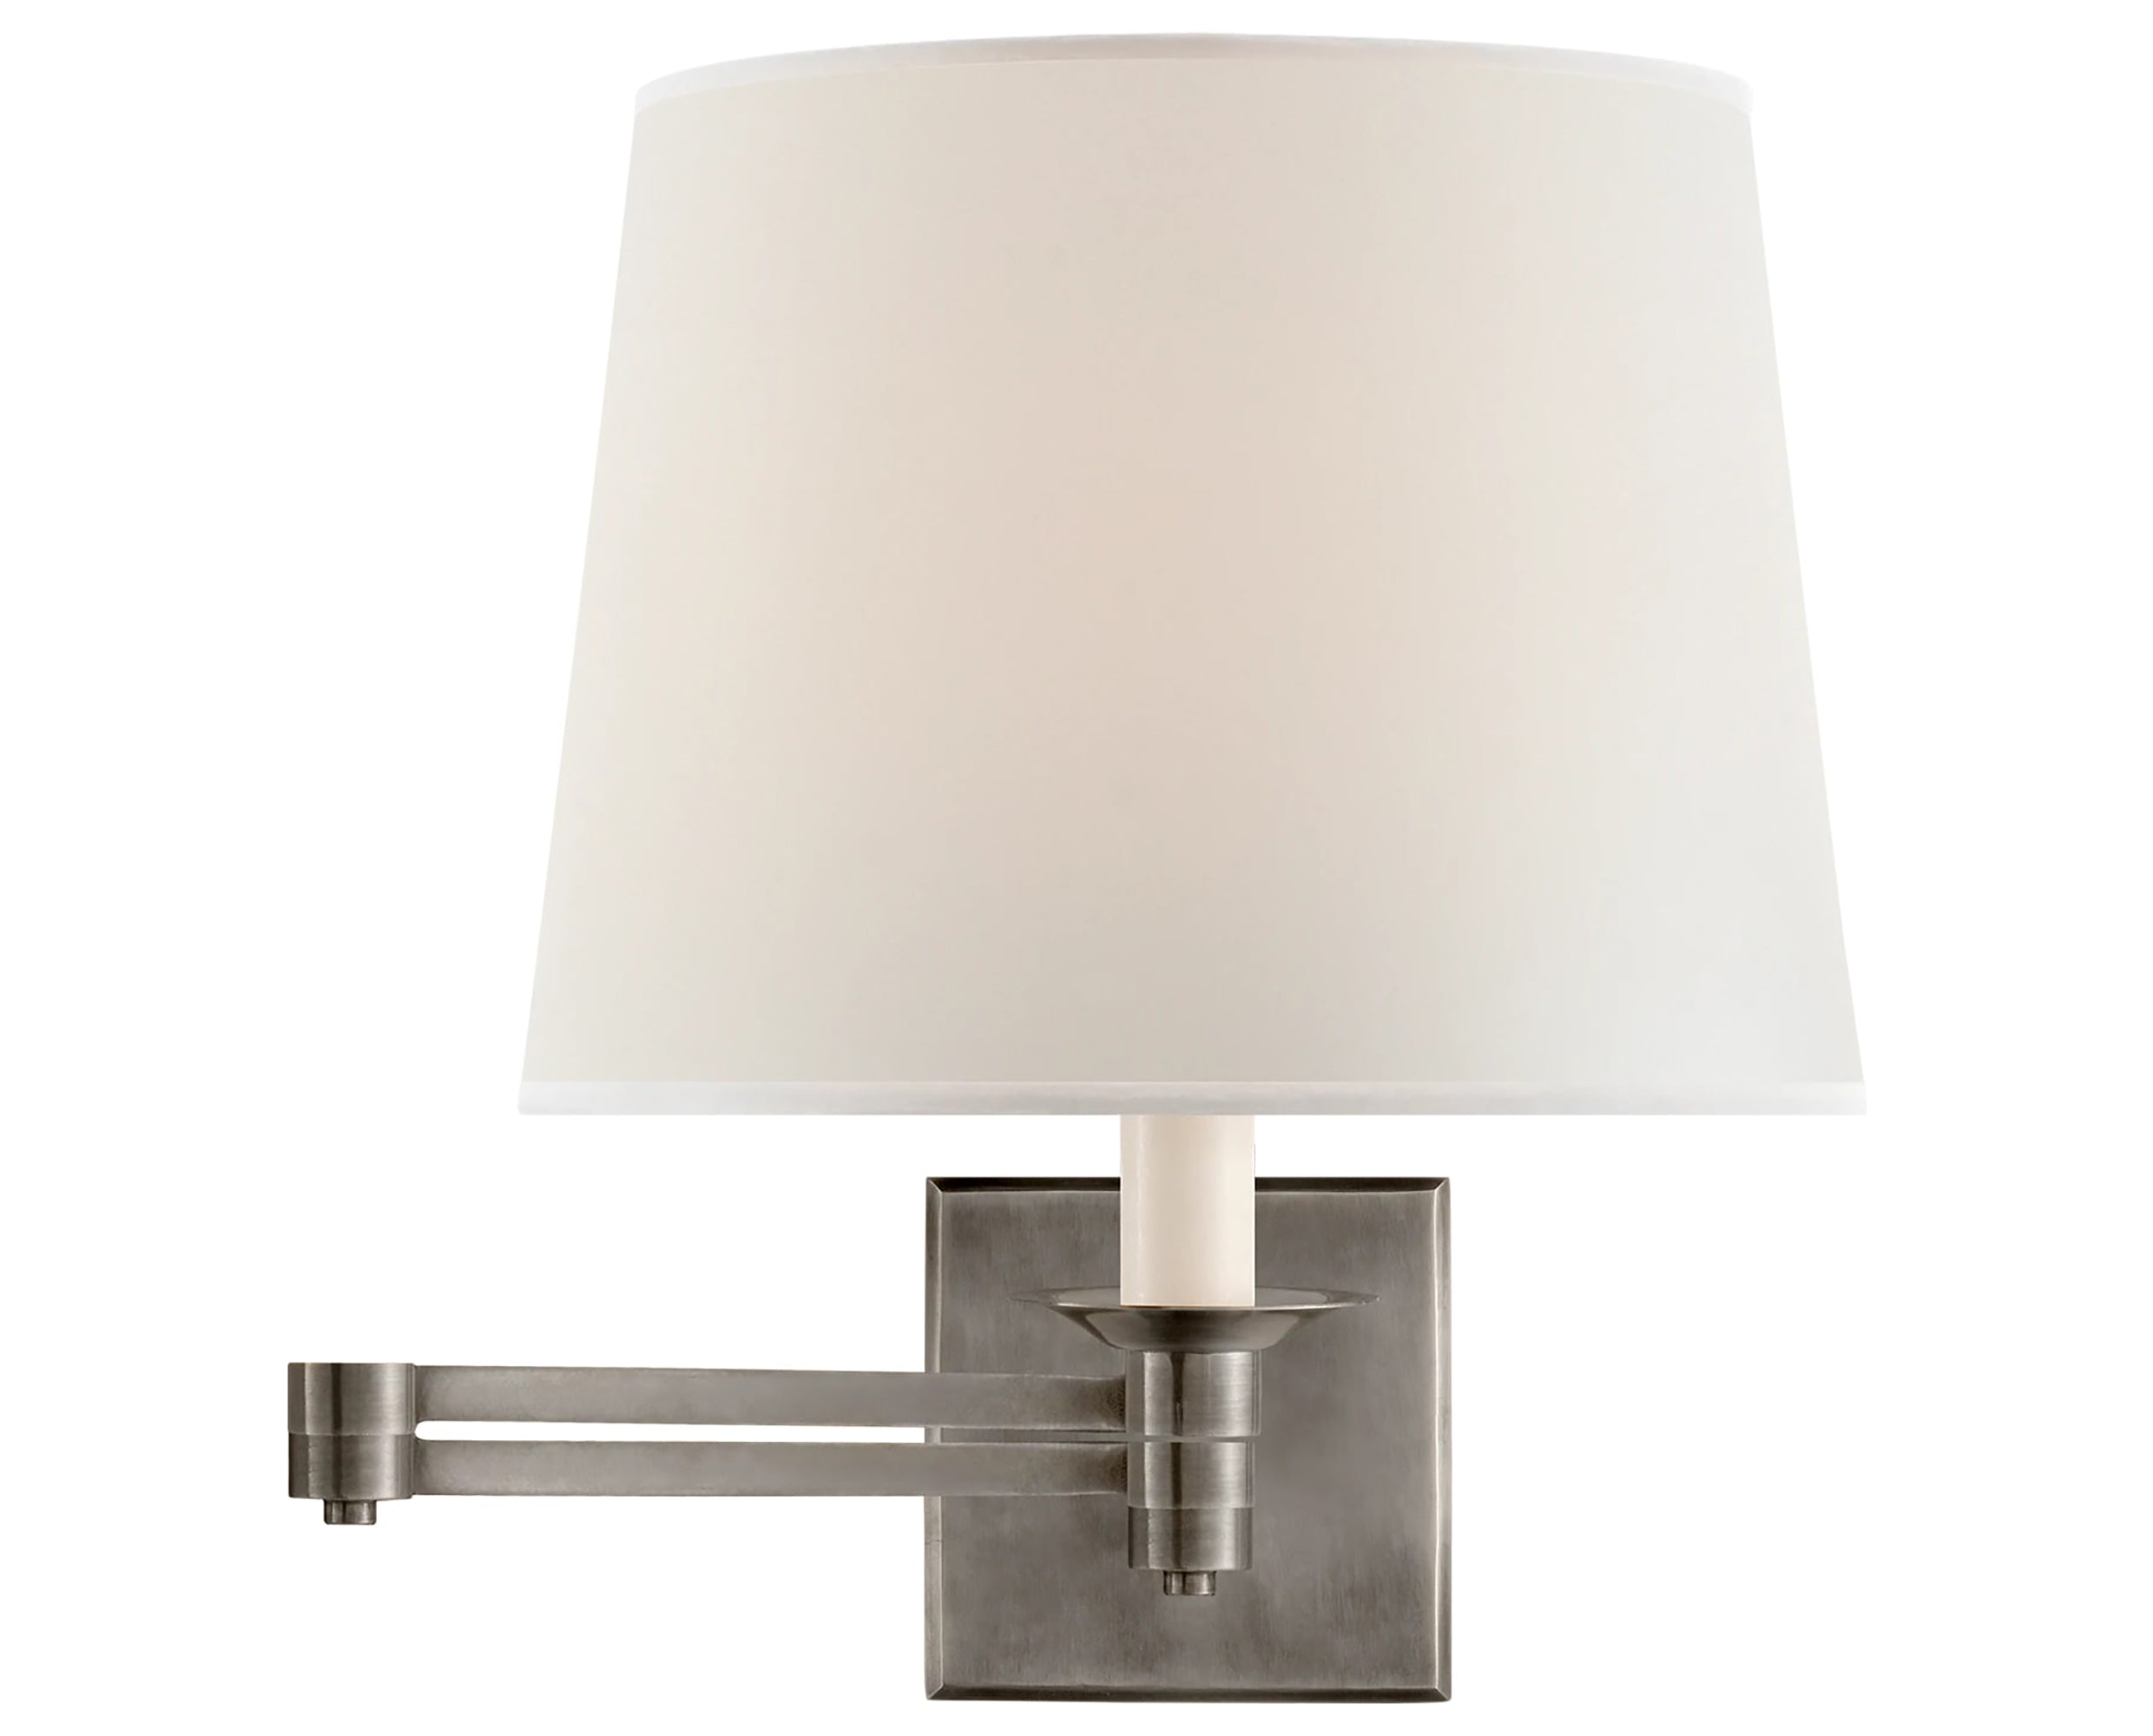 Antique Nickel & Percale Nordy | Evans Swing Arm Sconce | Valley Ridge Furniture